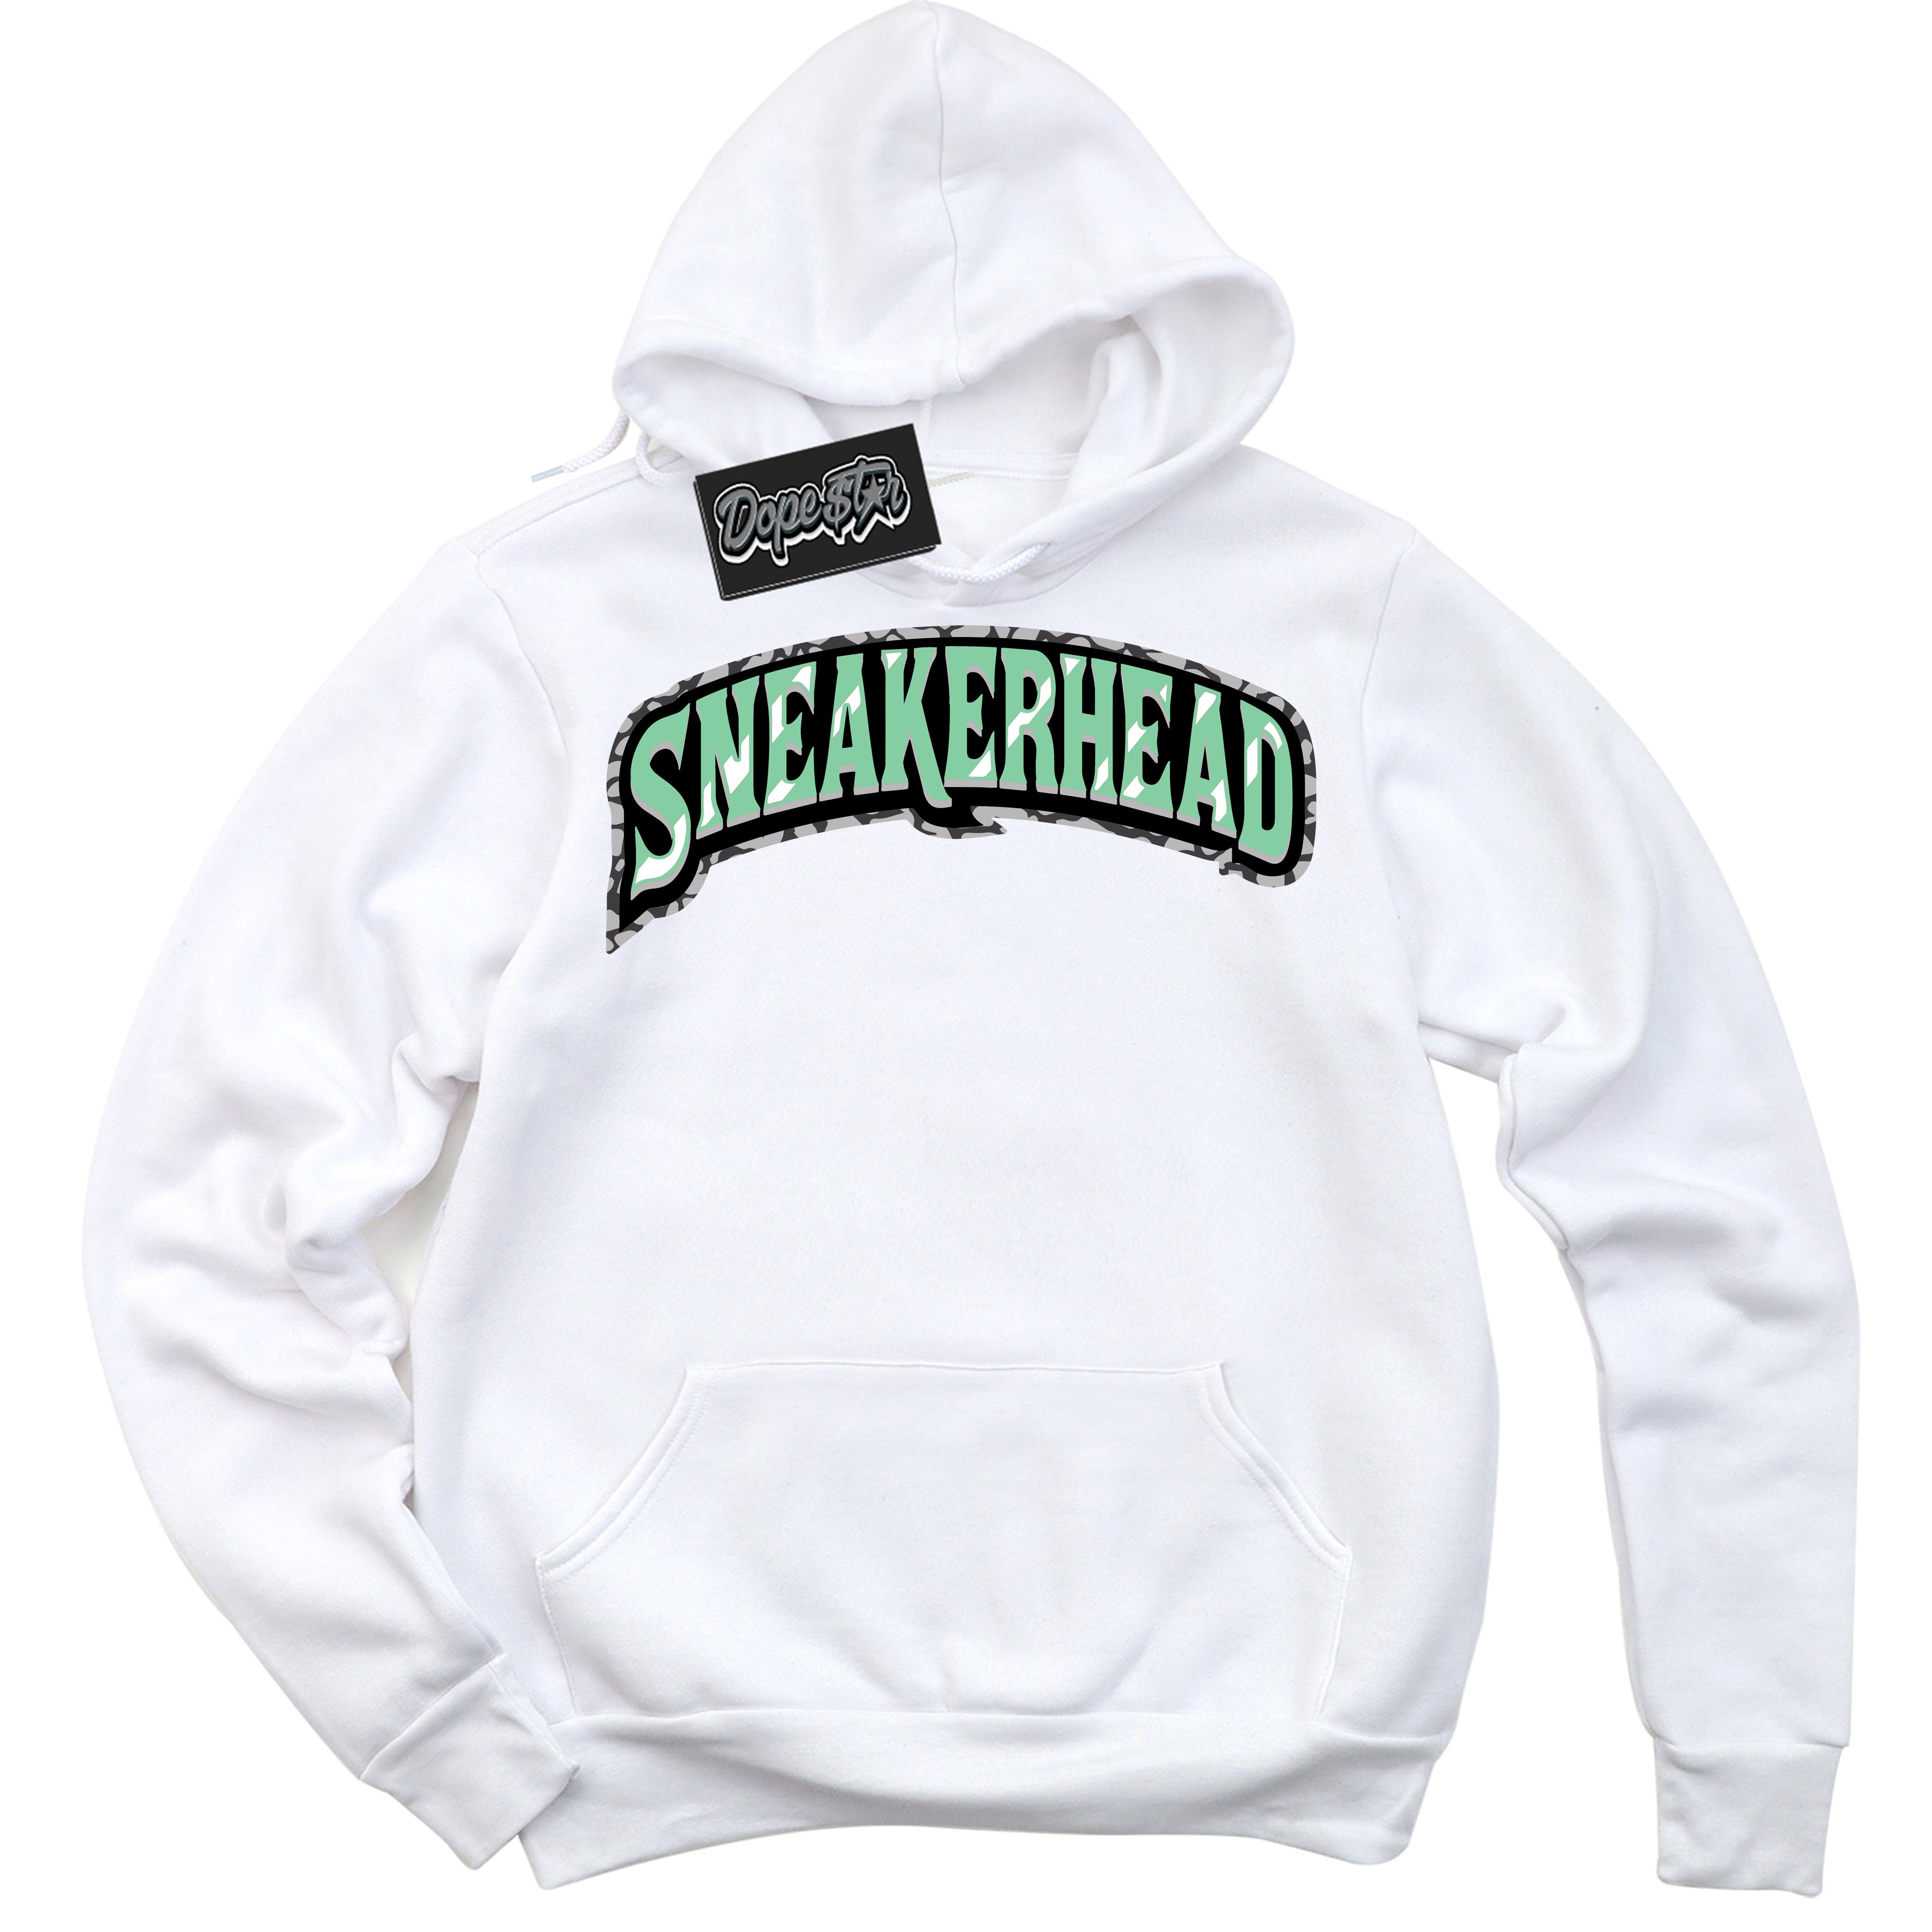 Cool White Graphic DopeStar Hoodie with “ Sneakerhead “ print, that perfectly matches Green Glow 3s sneakers